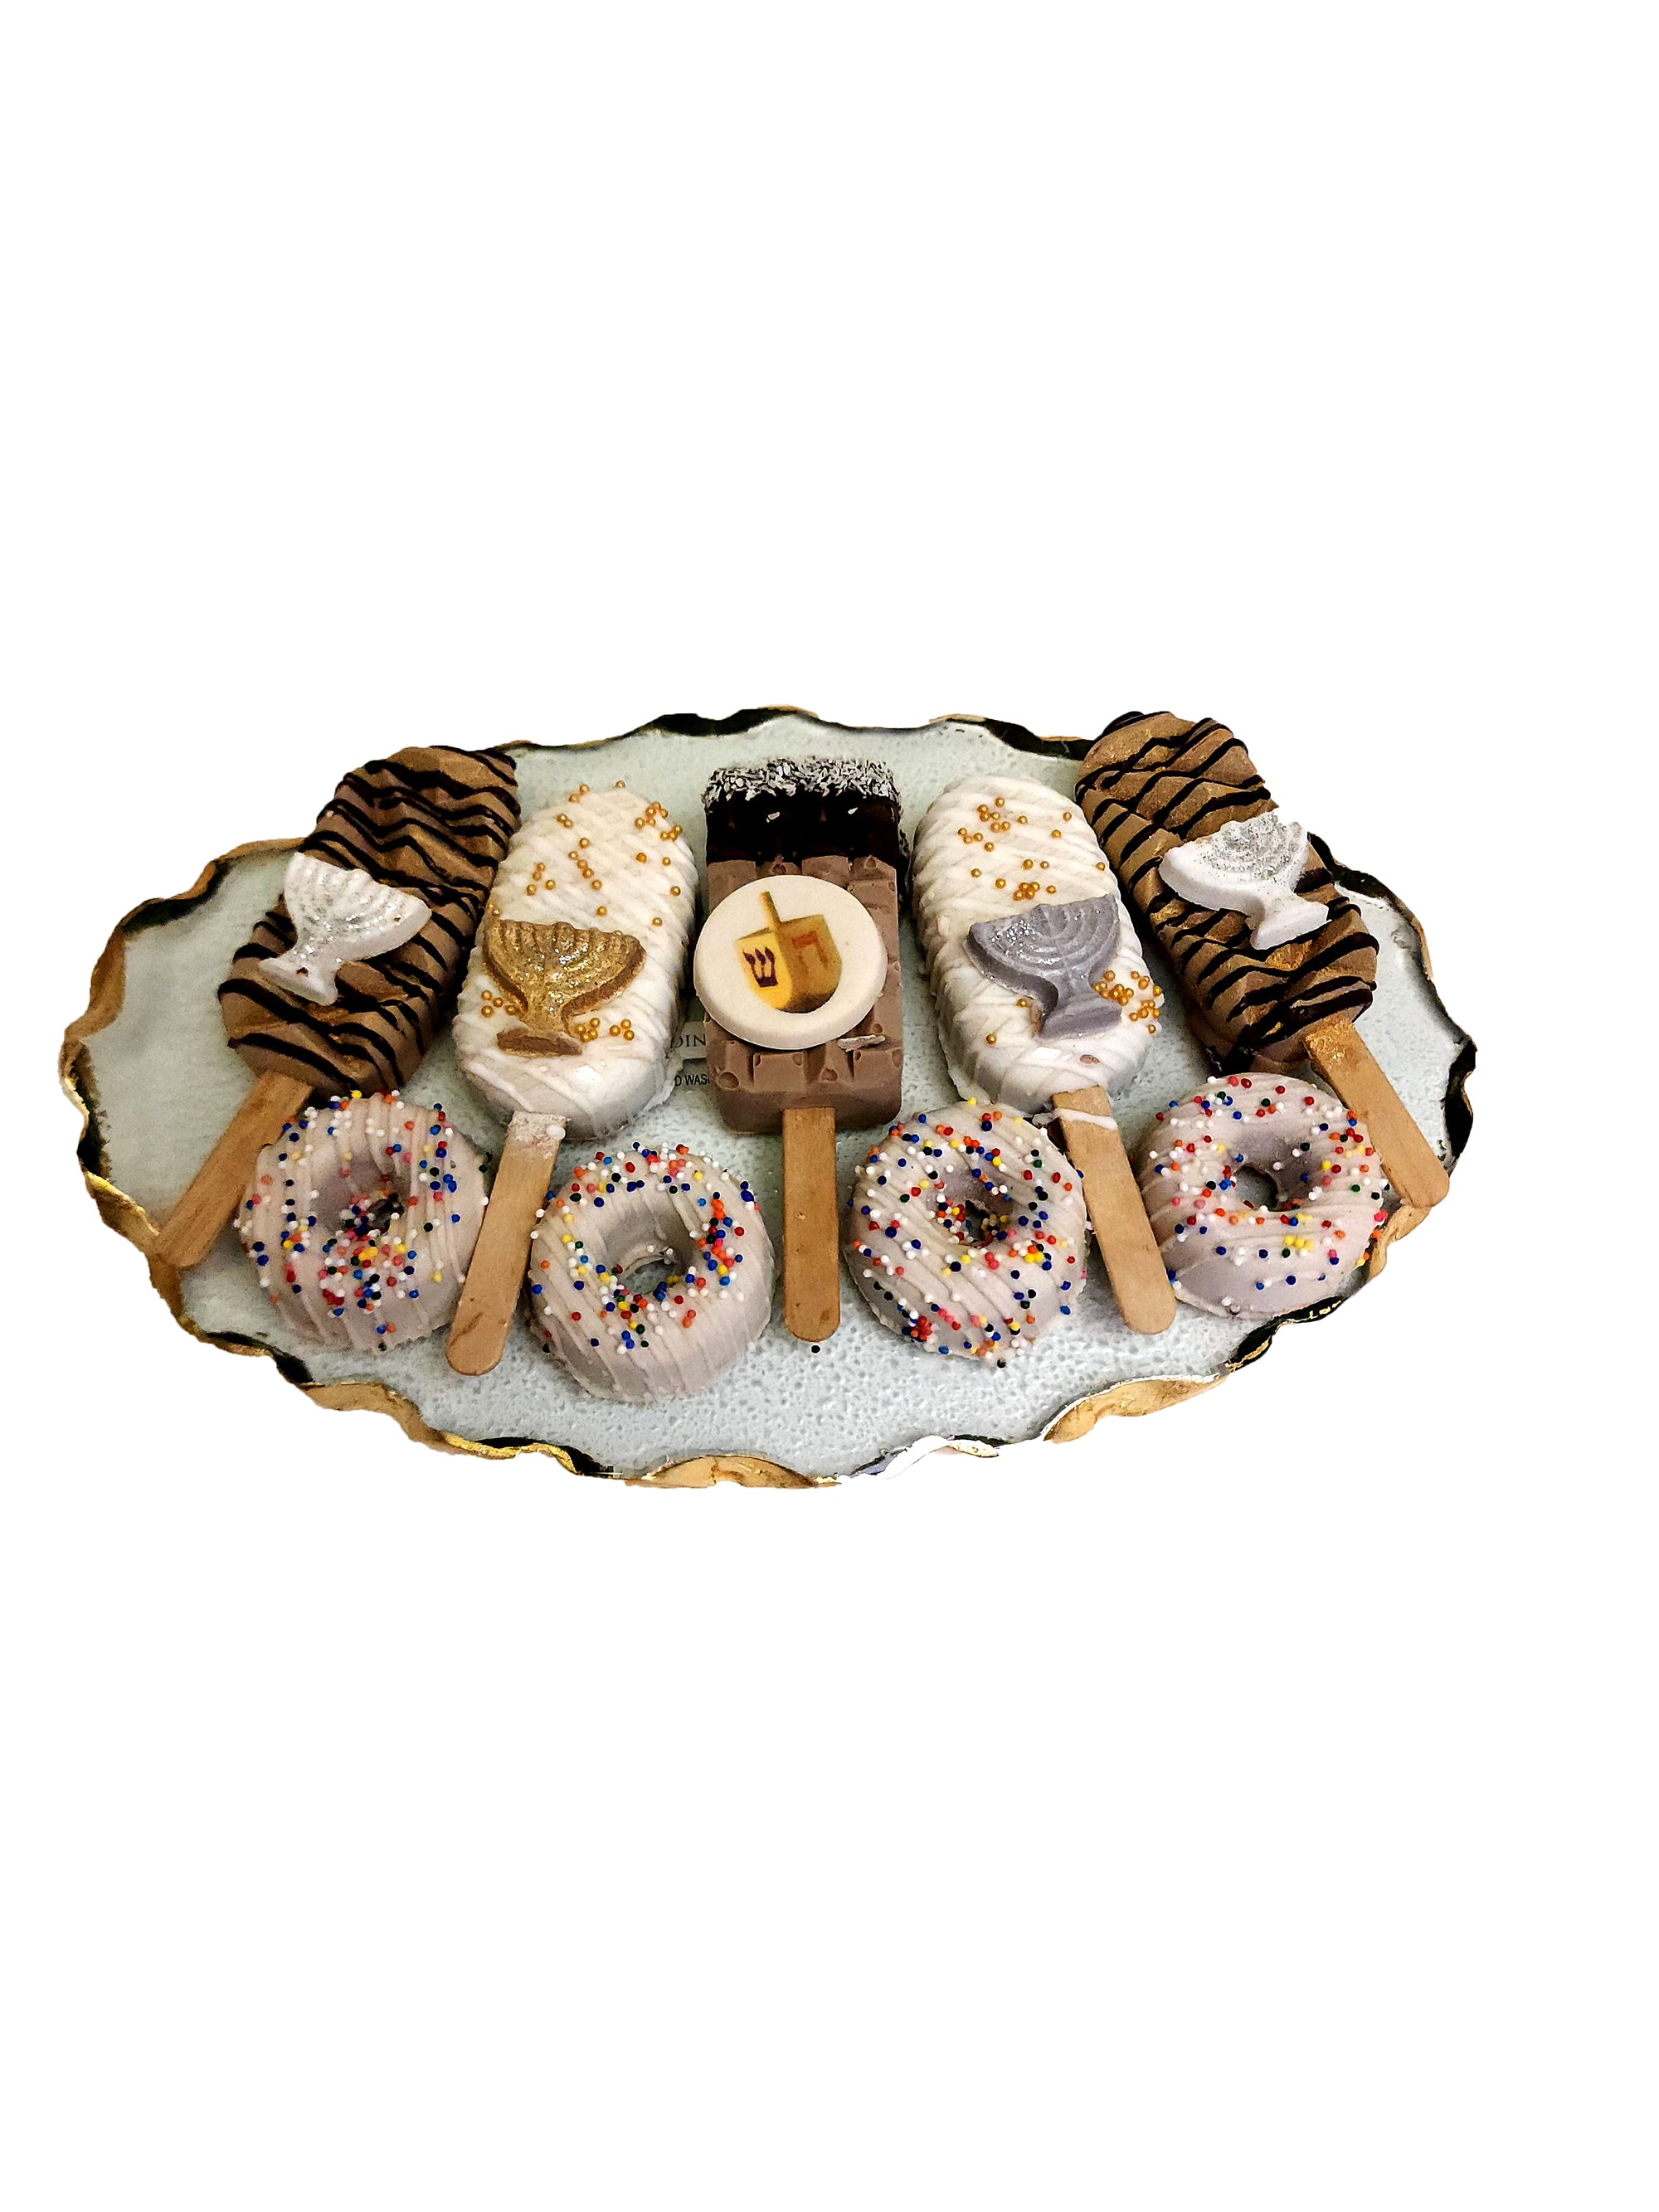 Chanukah Gold Rim Tray with Chocolate Arrangement Gift